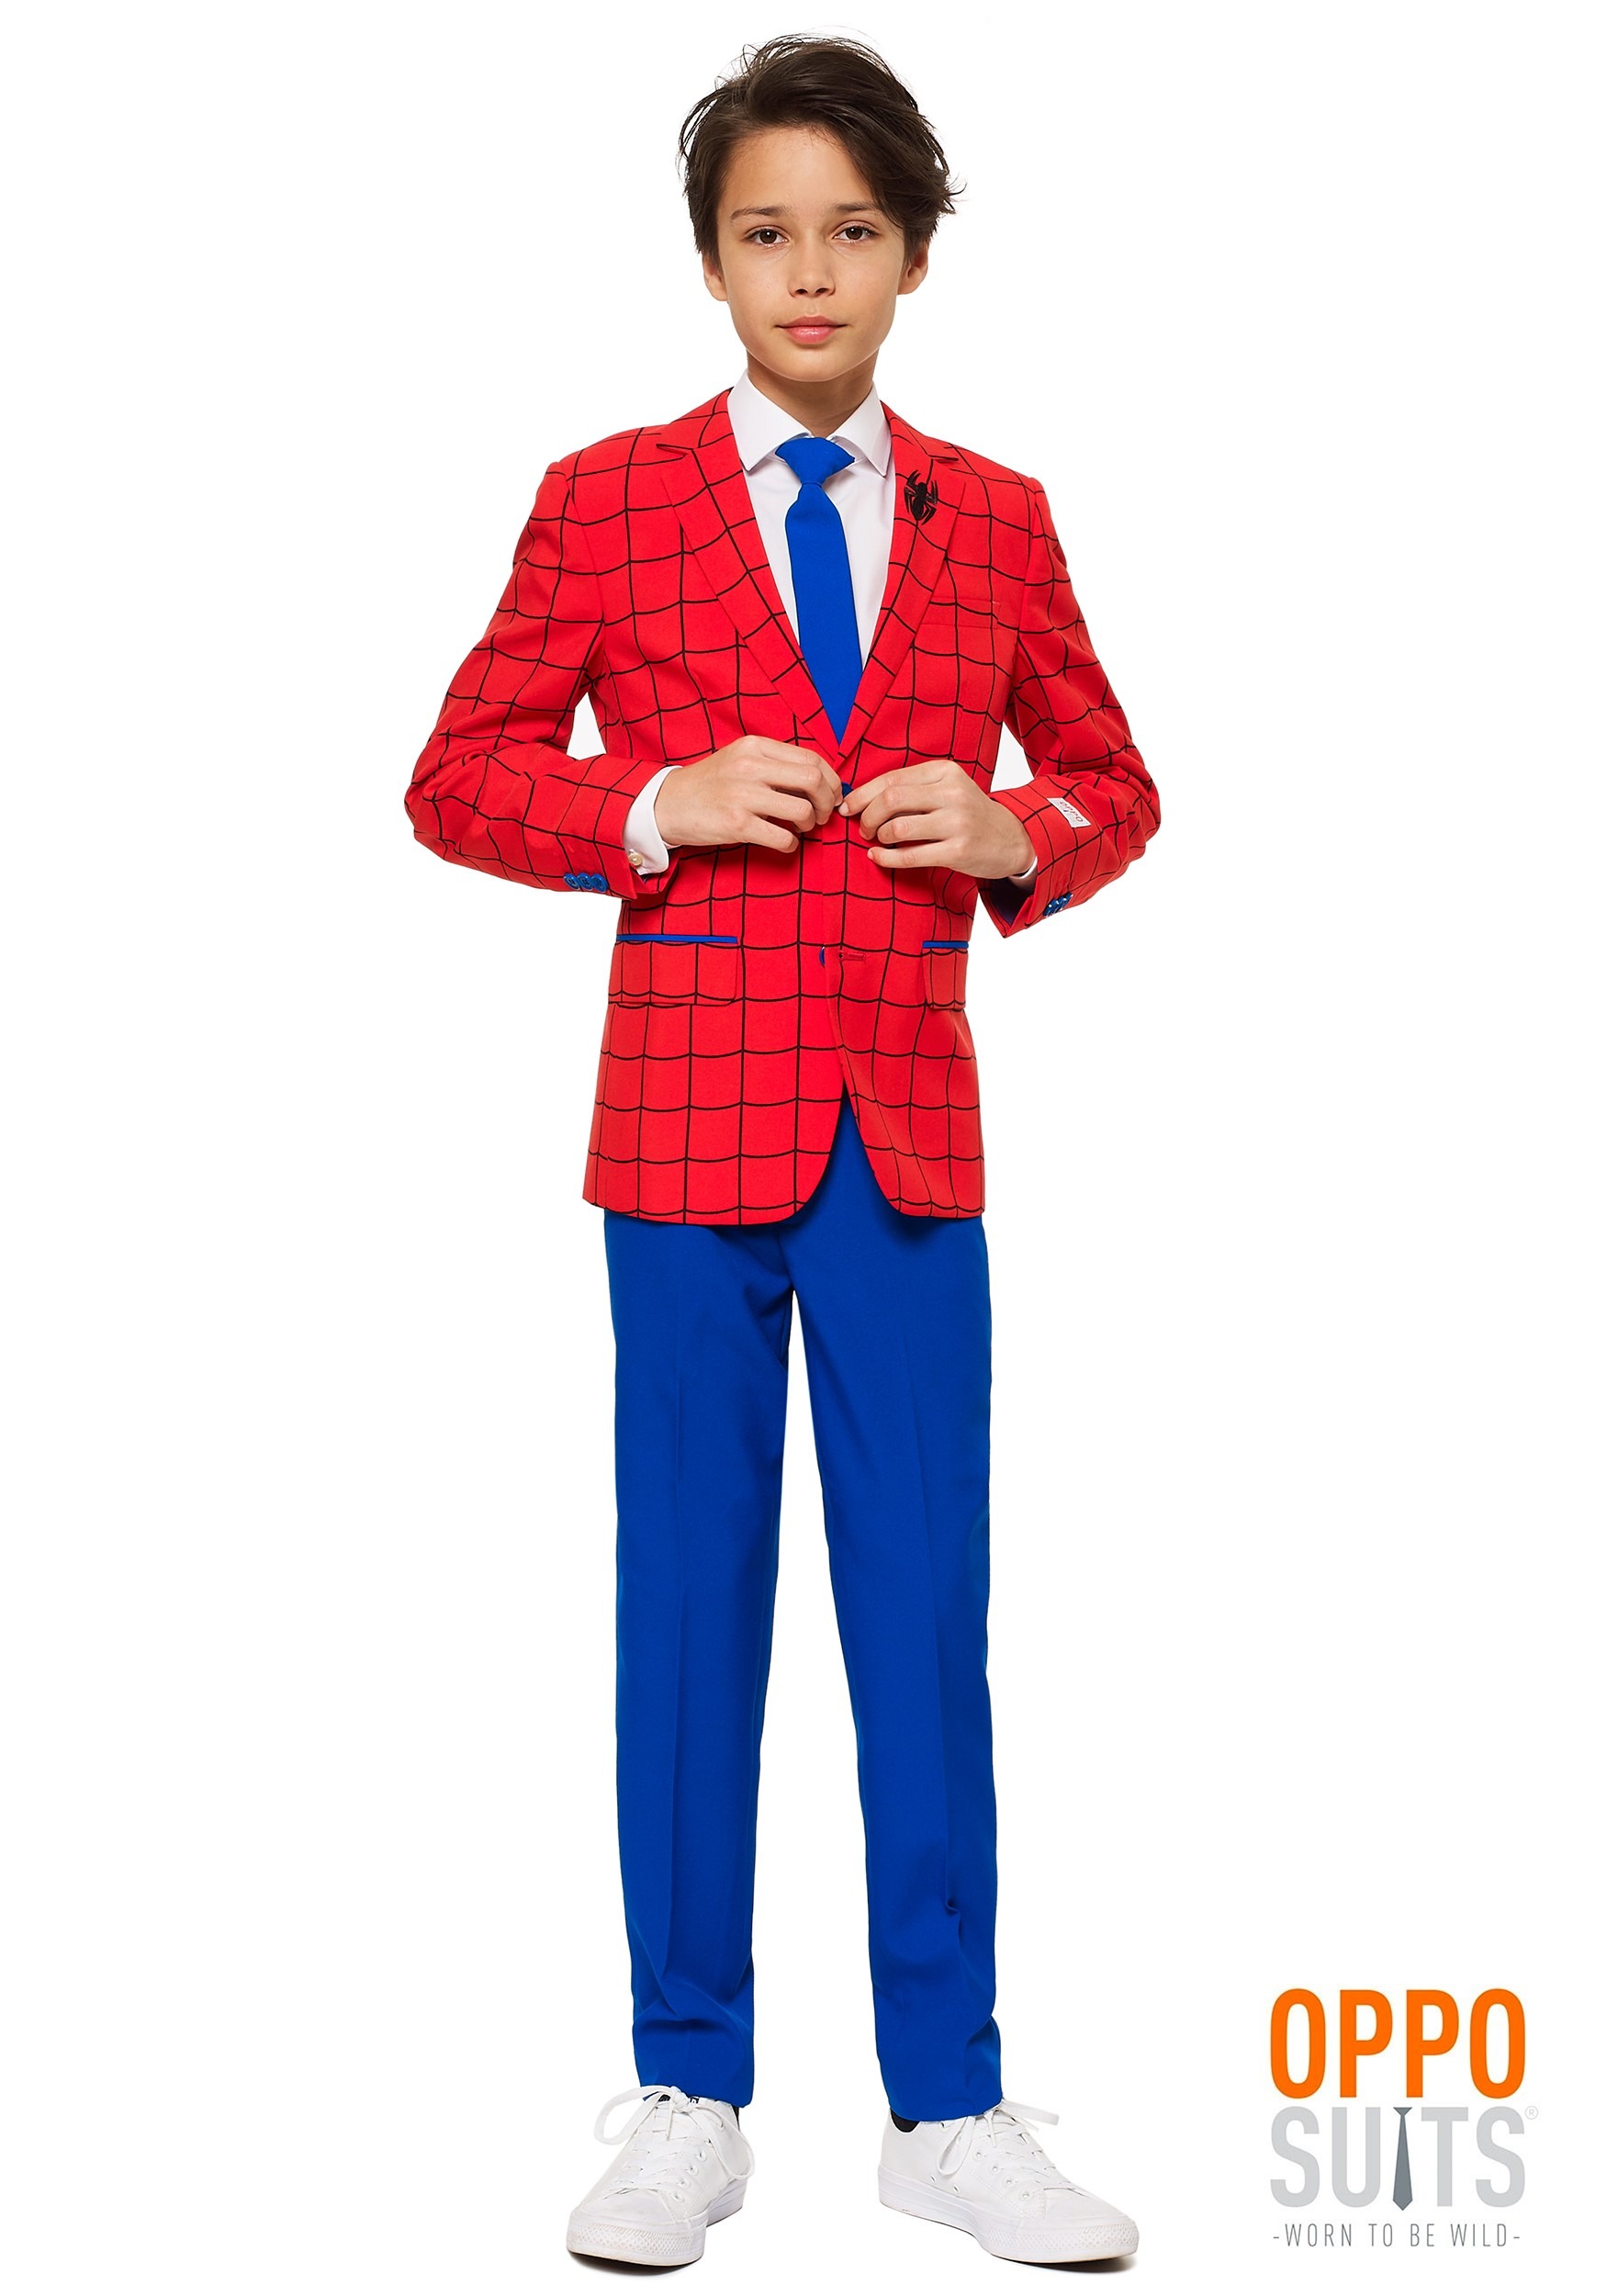 Opposuits Size Chart